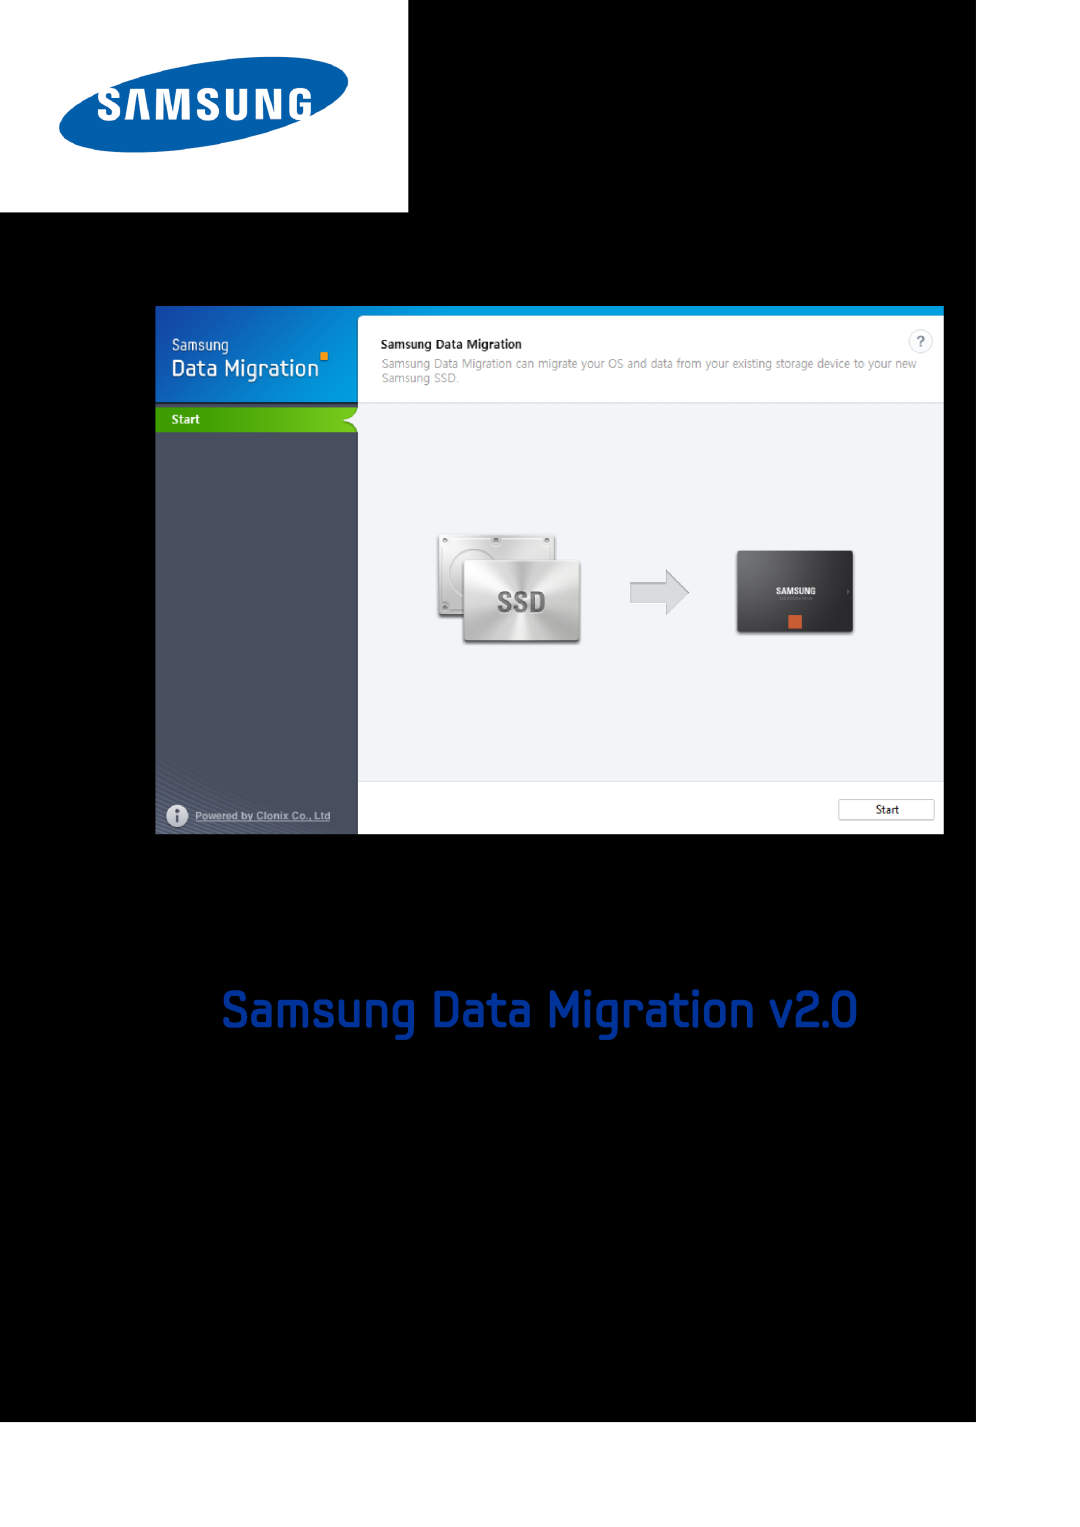 Samsung MZMTD128HAFV00000, MZ7PC128 manual Samsung Data Migration, Introduction and Installation Guide, 2013. 3 Rev 